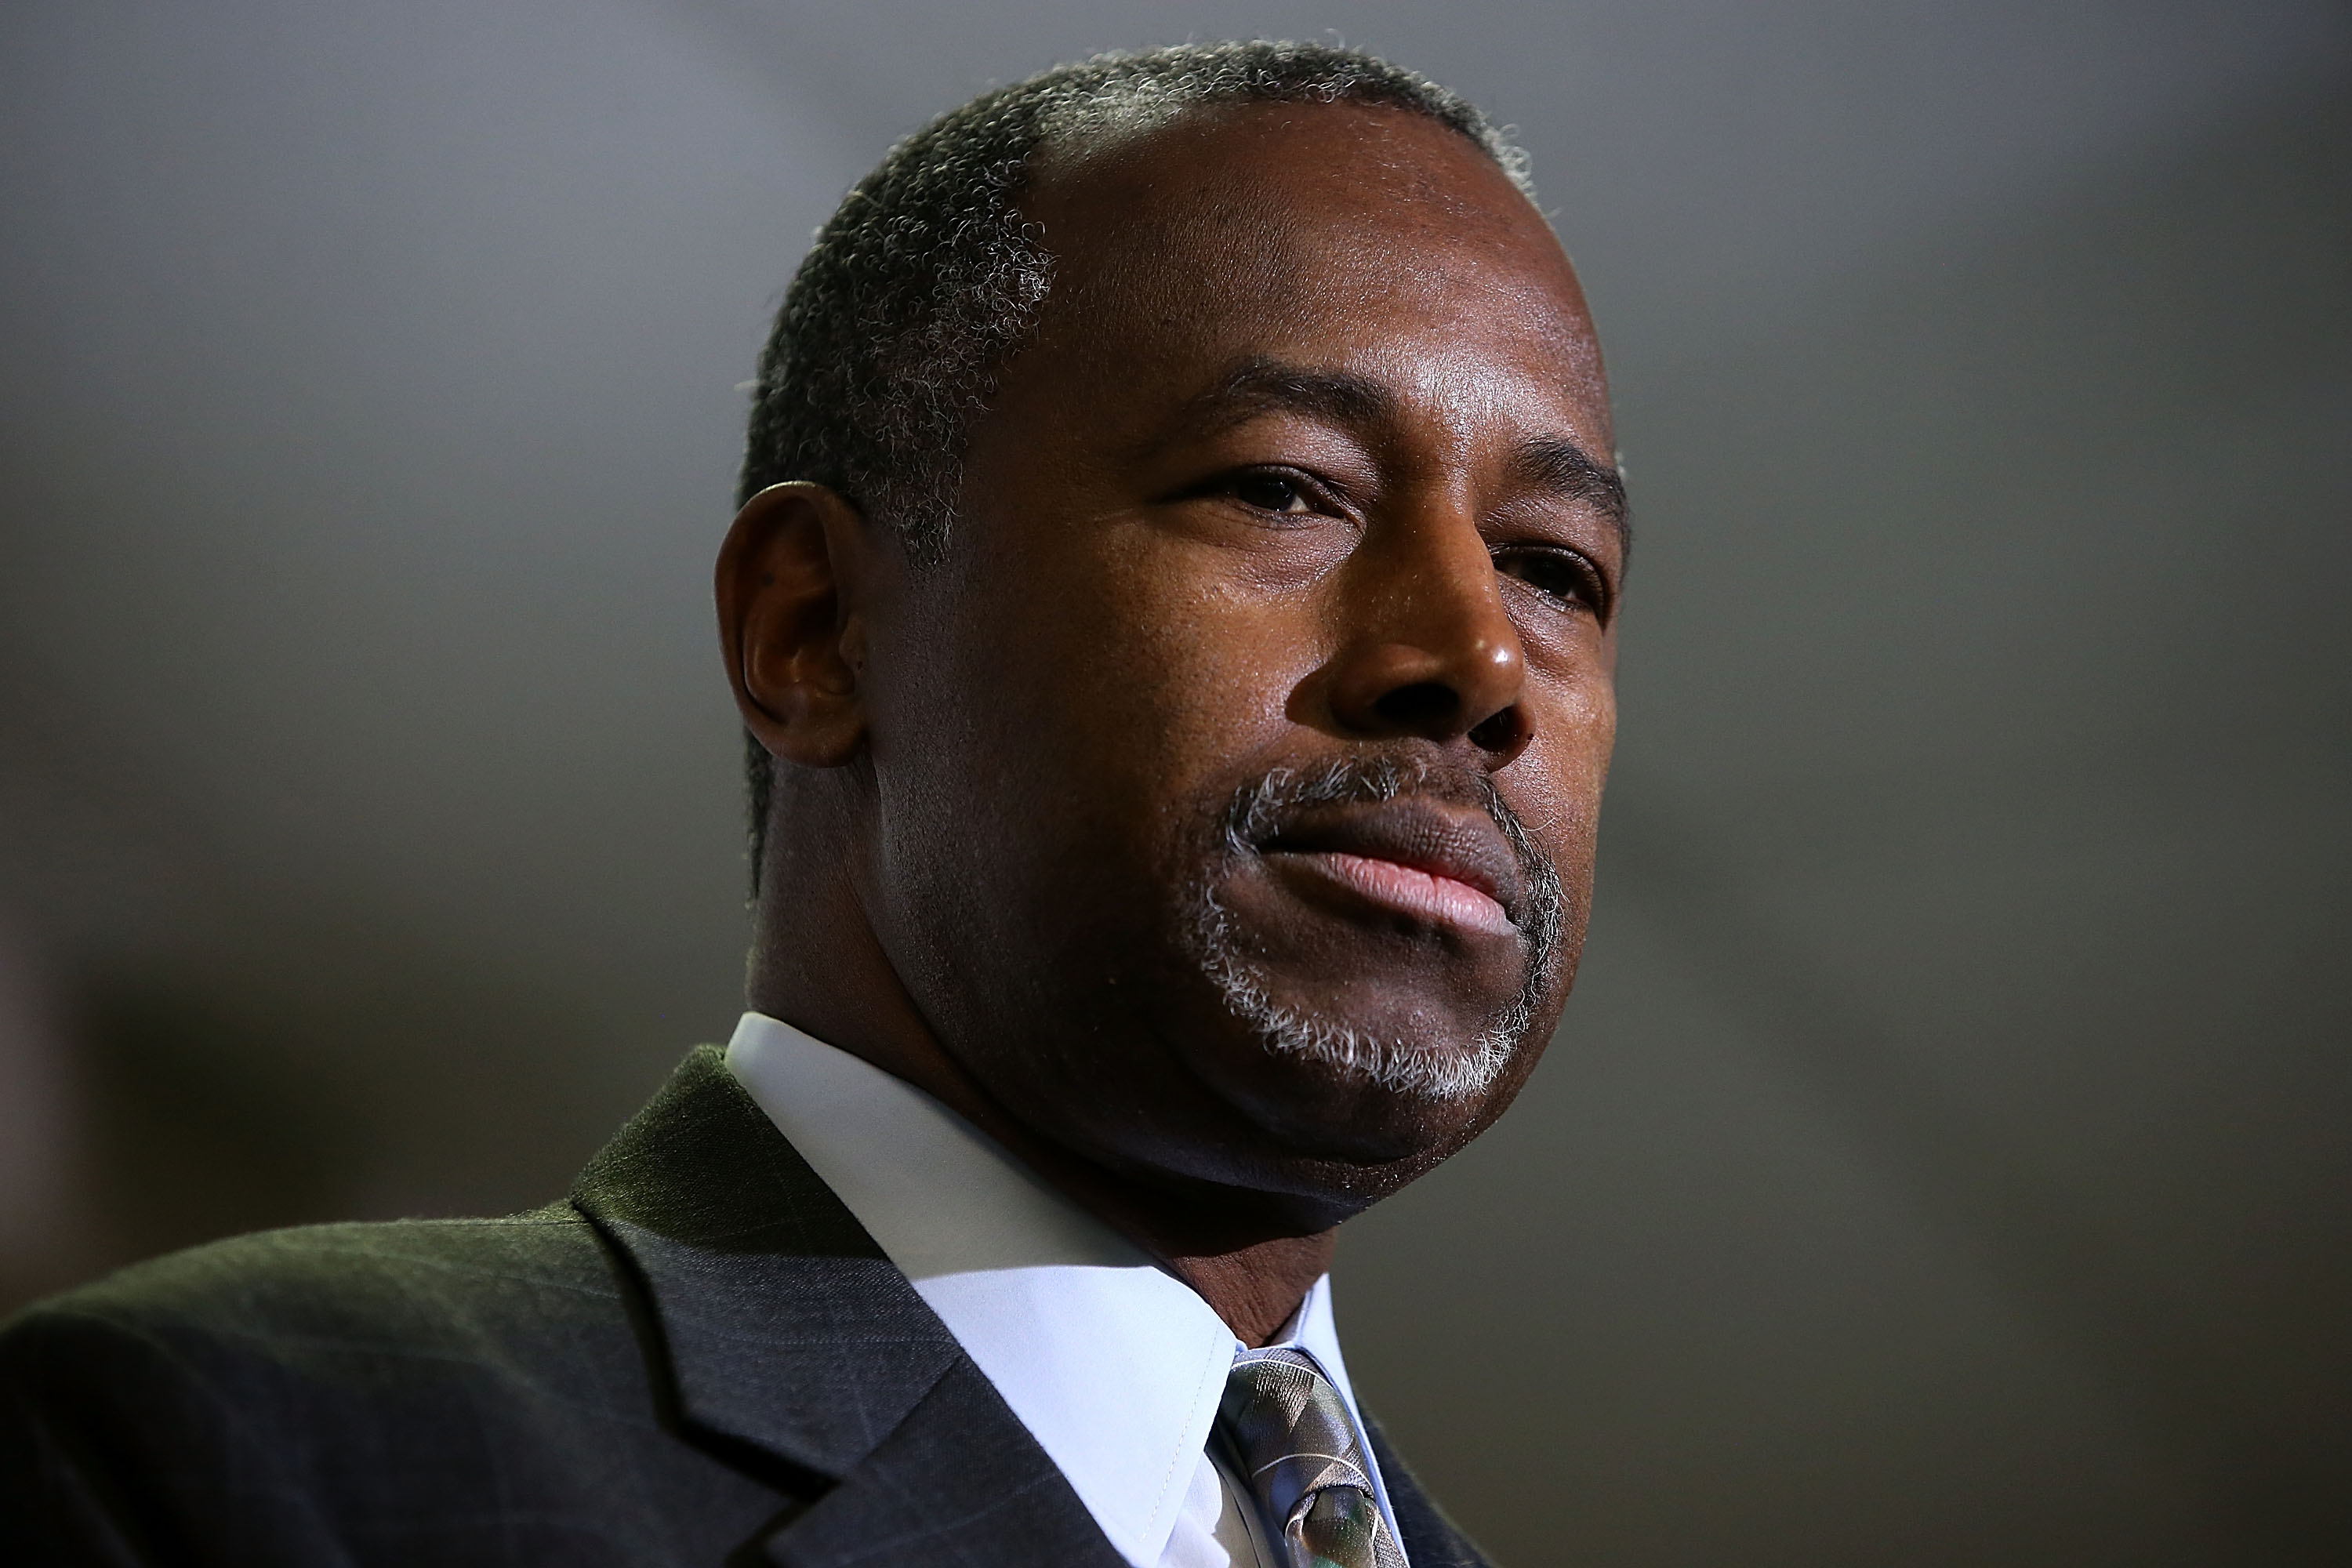 Republican presidential candidate Ben Carson speaks during a news conference before a campaign event at Colorado Christian University on October 29, 2015 in Lakewood, Colorado. (Justin Sullivan&mdash;Getty Images)